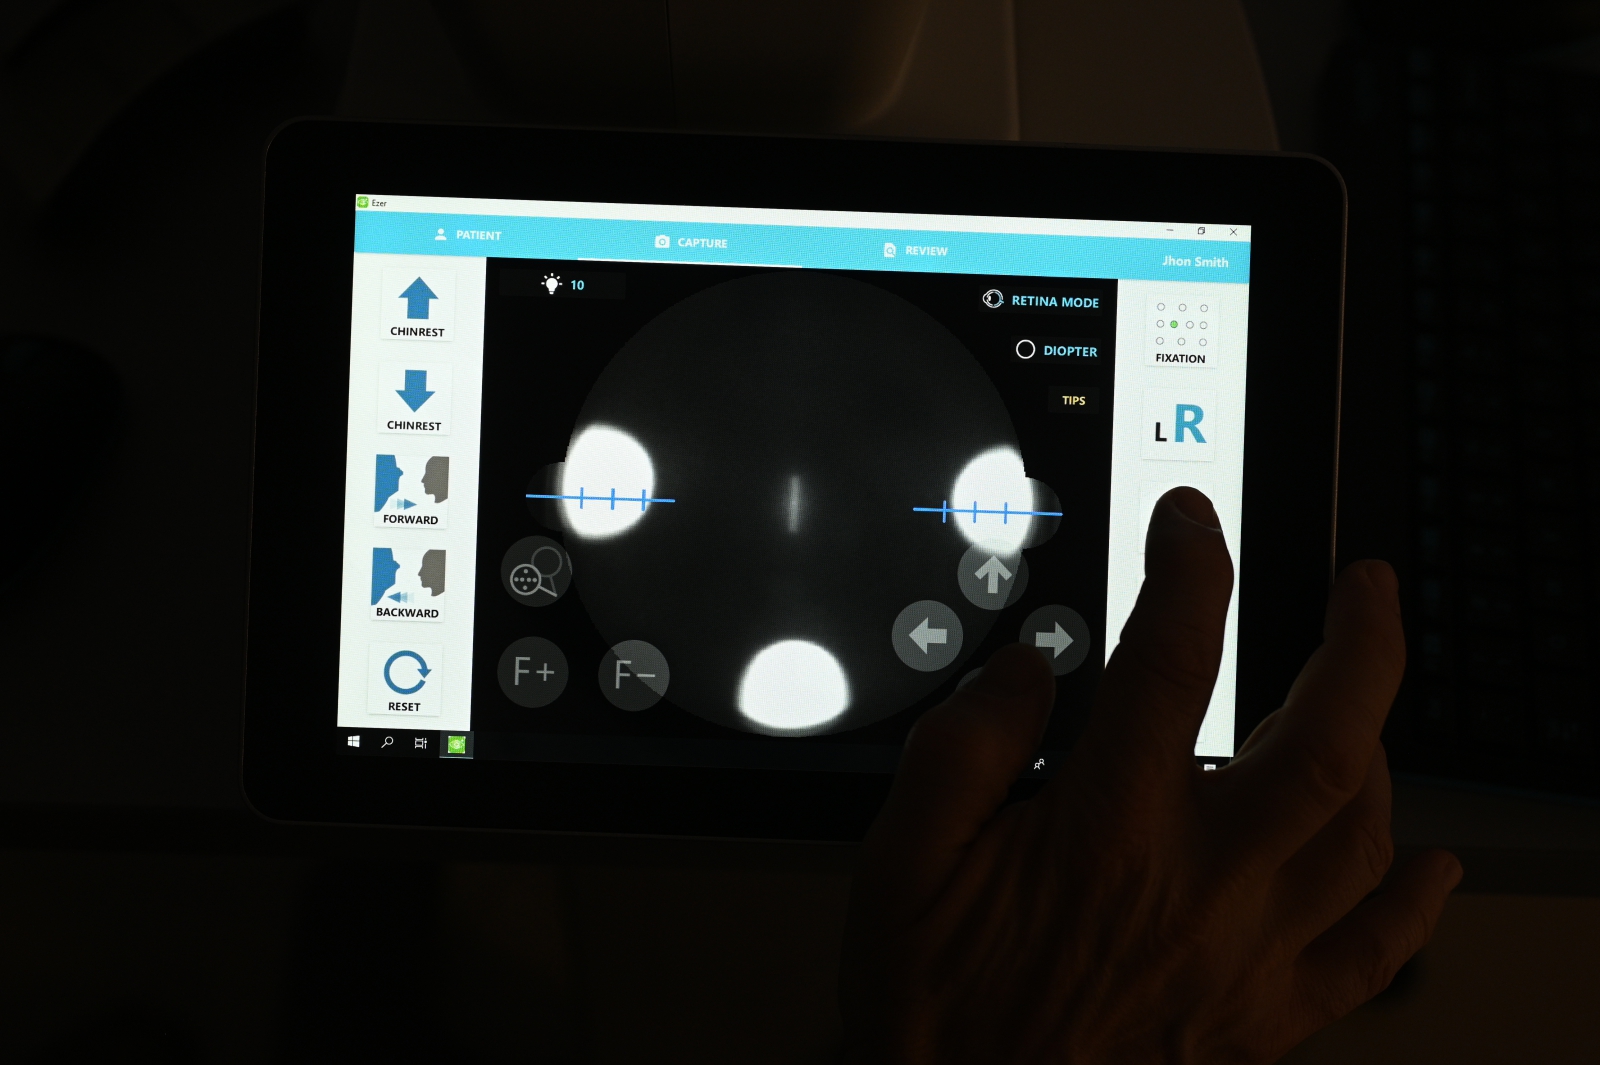 NFC-700 can capture cornea images for doctor to examine the cornea, iris, ciliary body and sclera.